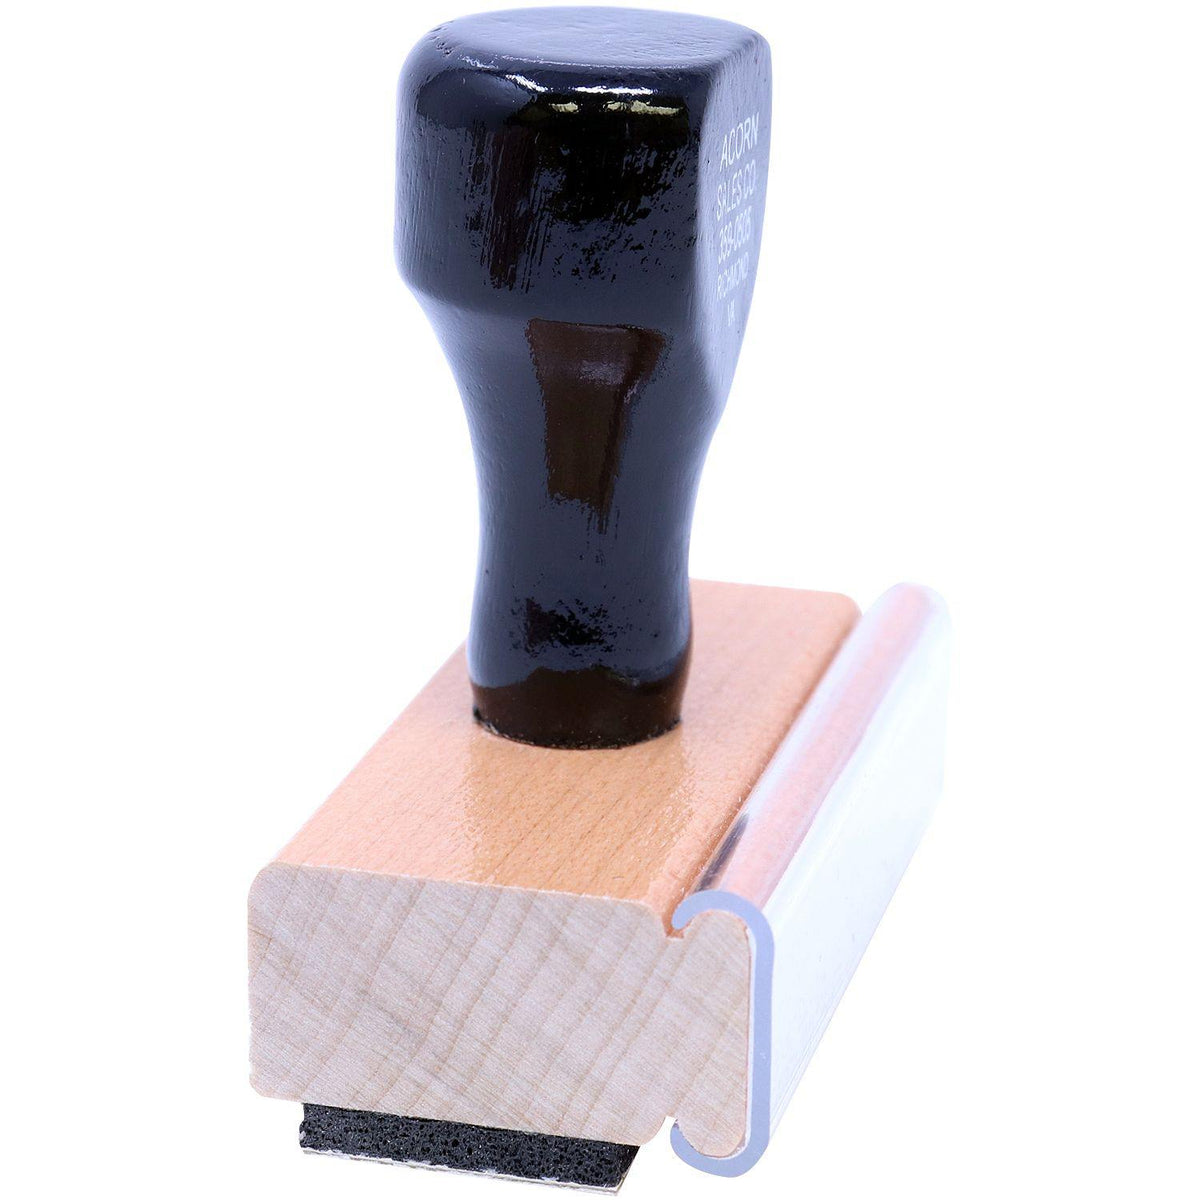 Side View of Advanced Placement Rubber Stamp at an Angle